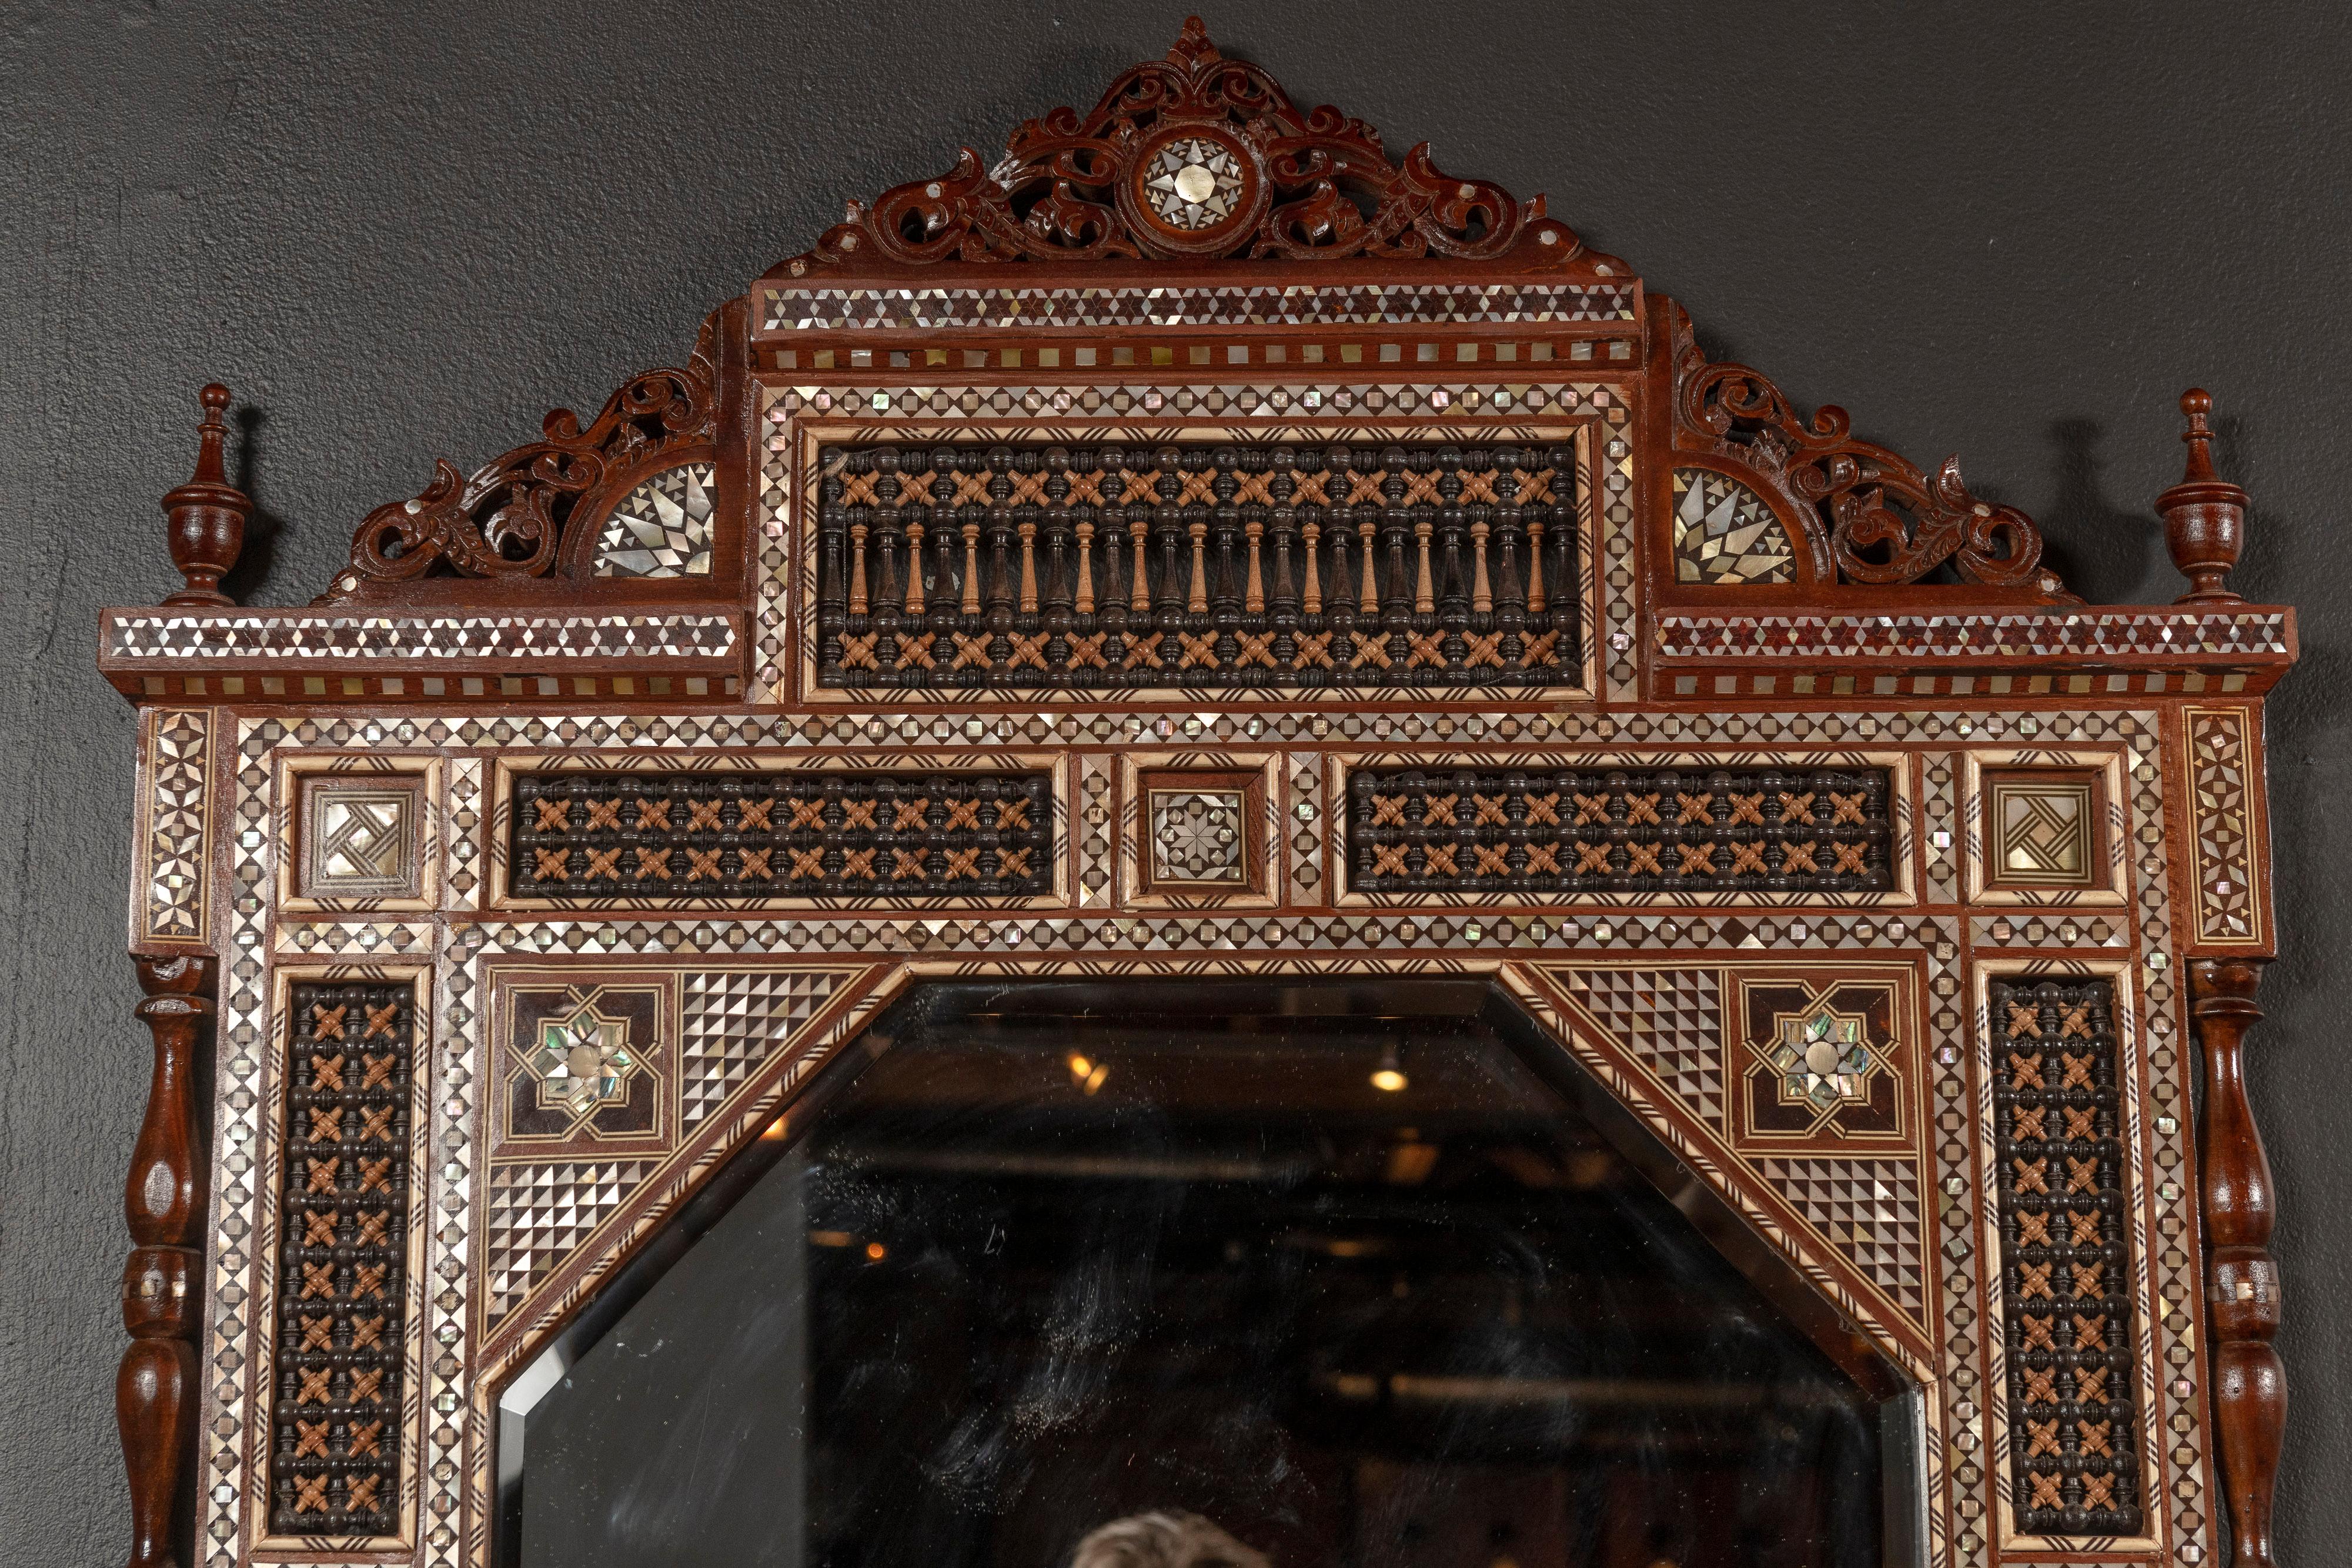 Two Unique Syrian Mirrors with Mother of Pearl Inlay and Wooden Marquetry  For Sale 1